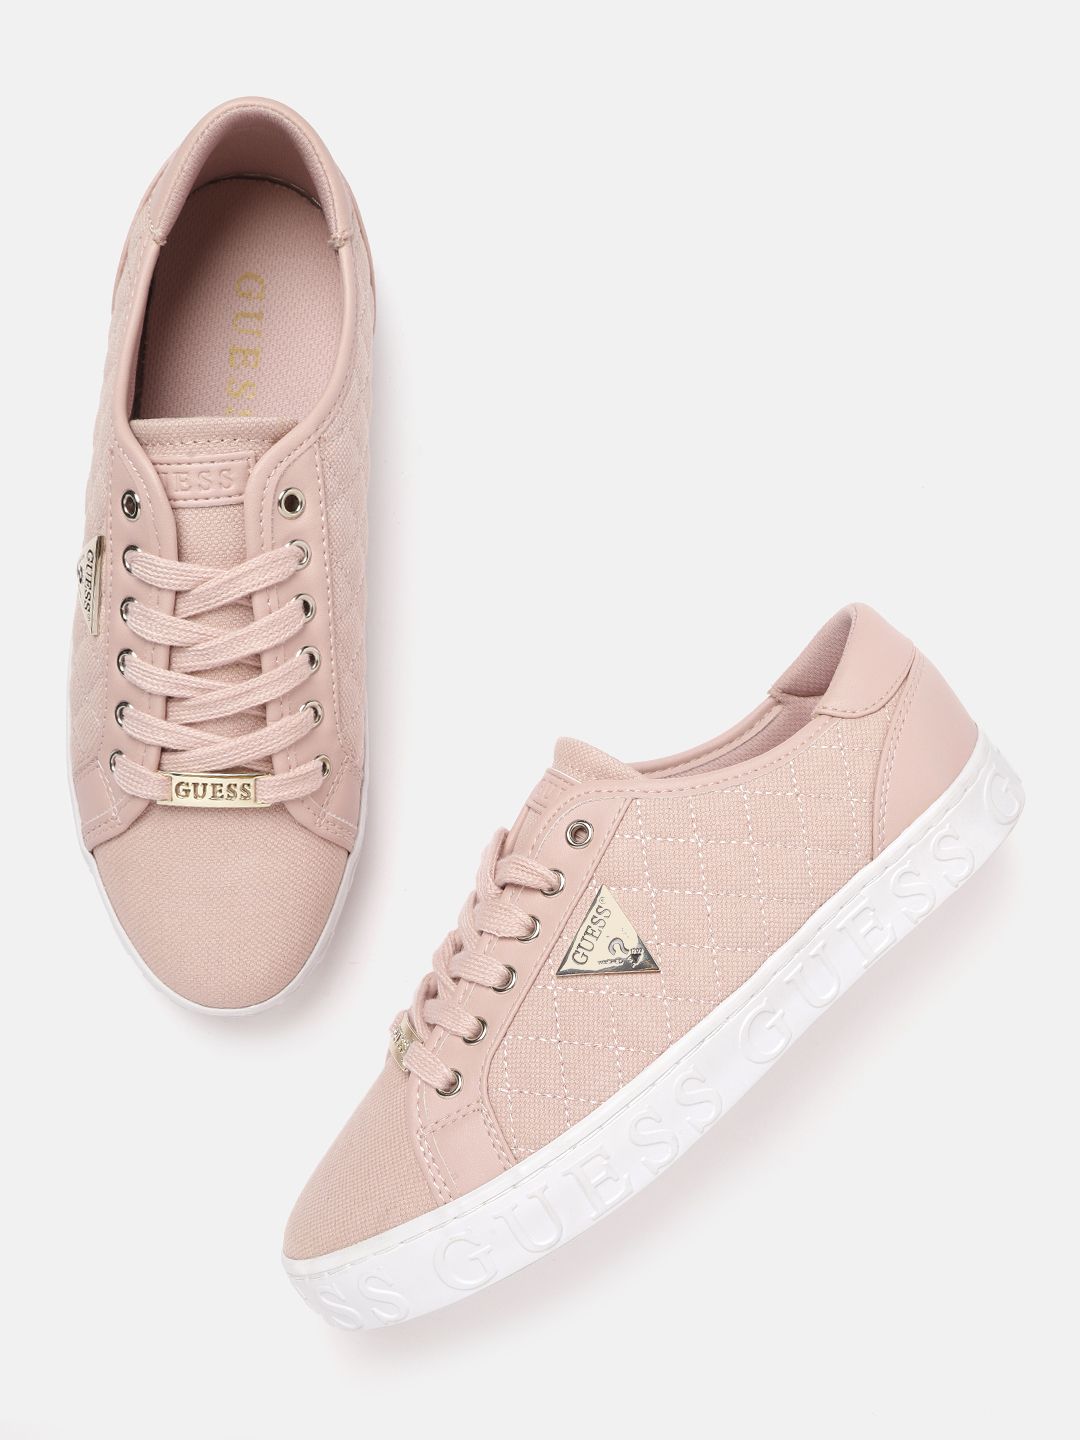 GUESS Women Peach-Coloured Quilted Woven Design Sneakers Price in India